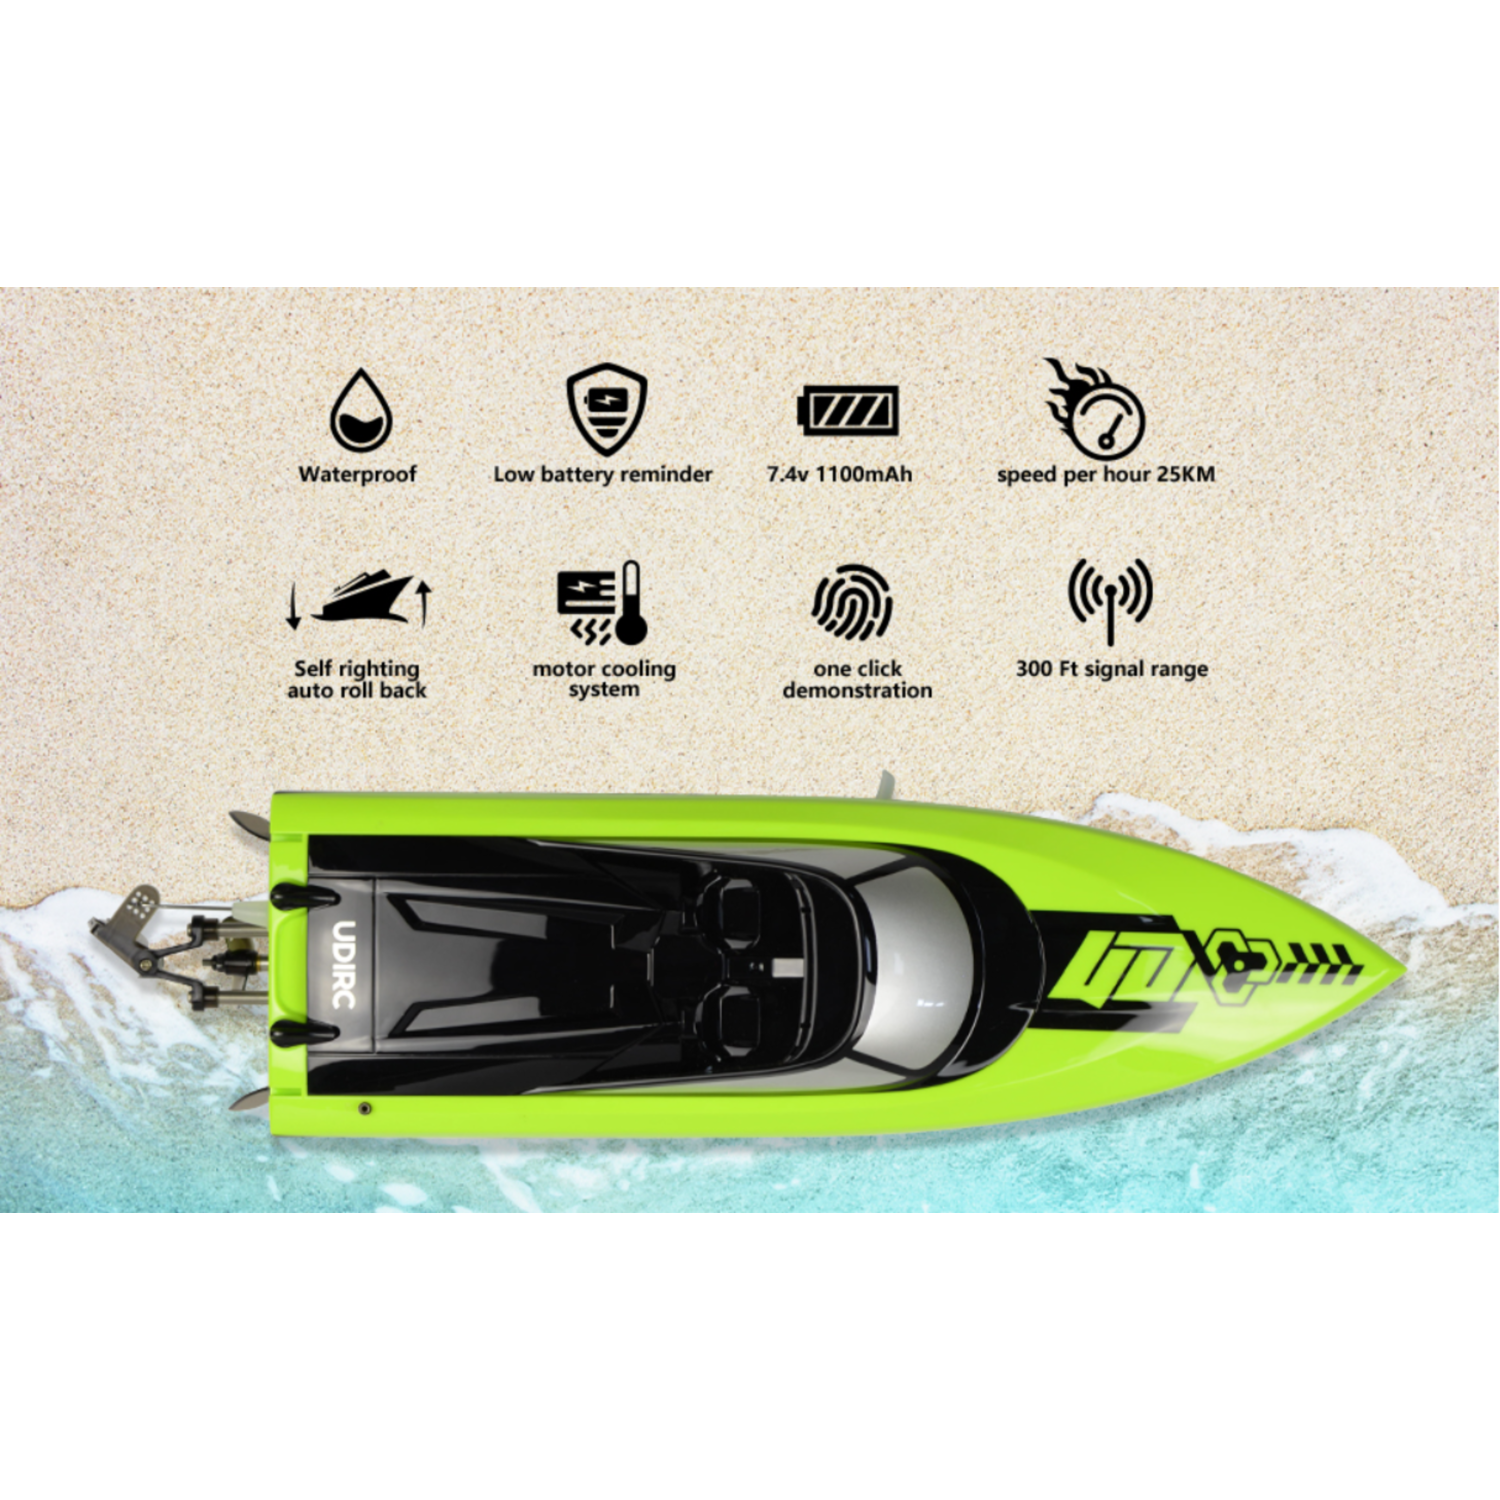 UDI020 Remote Control High Speed Boat Toys for Lakes and Pools